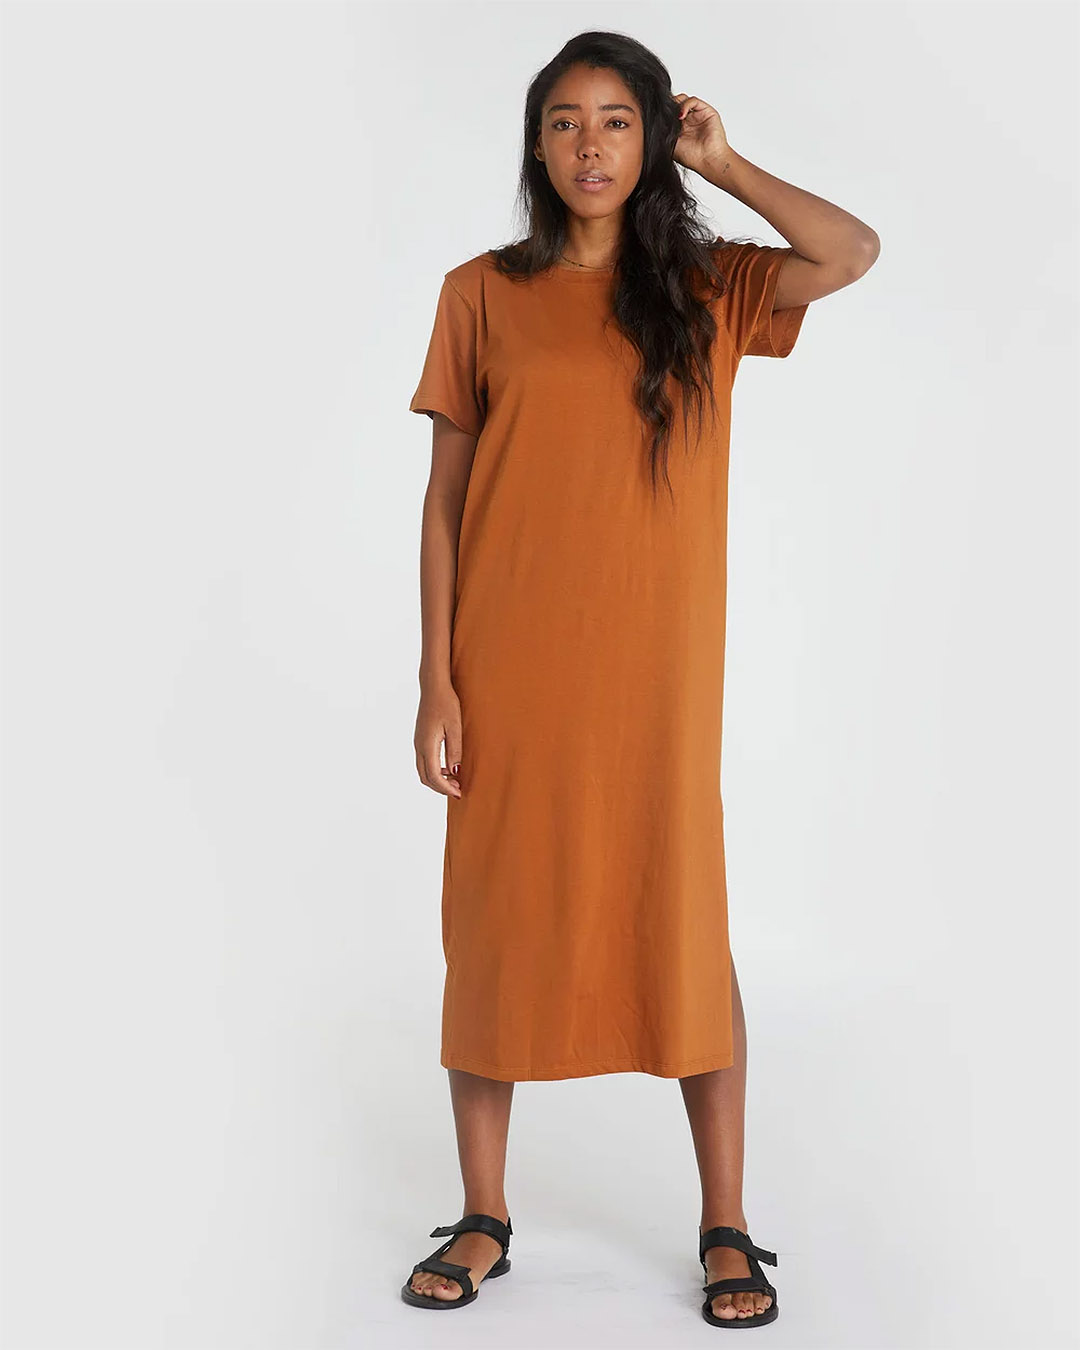 A head-to-toe shot of a woman wearing a burnt orange midi t-shirt with sandals. 